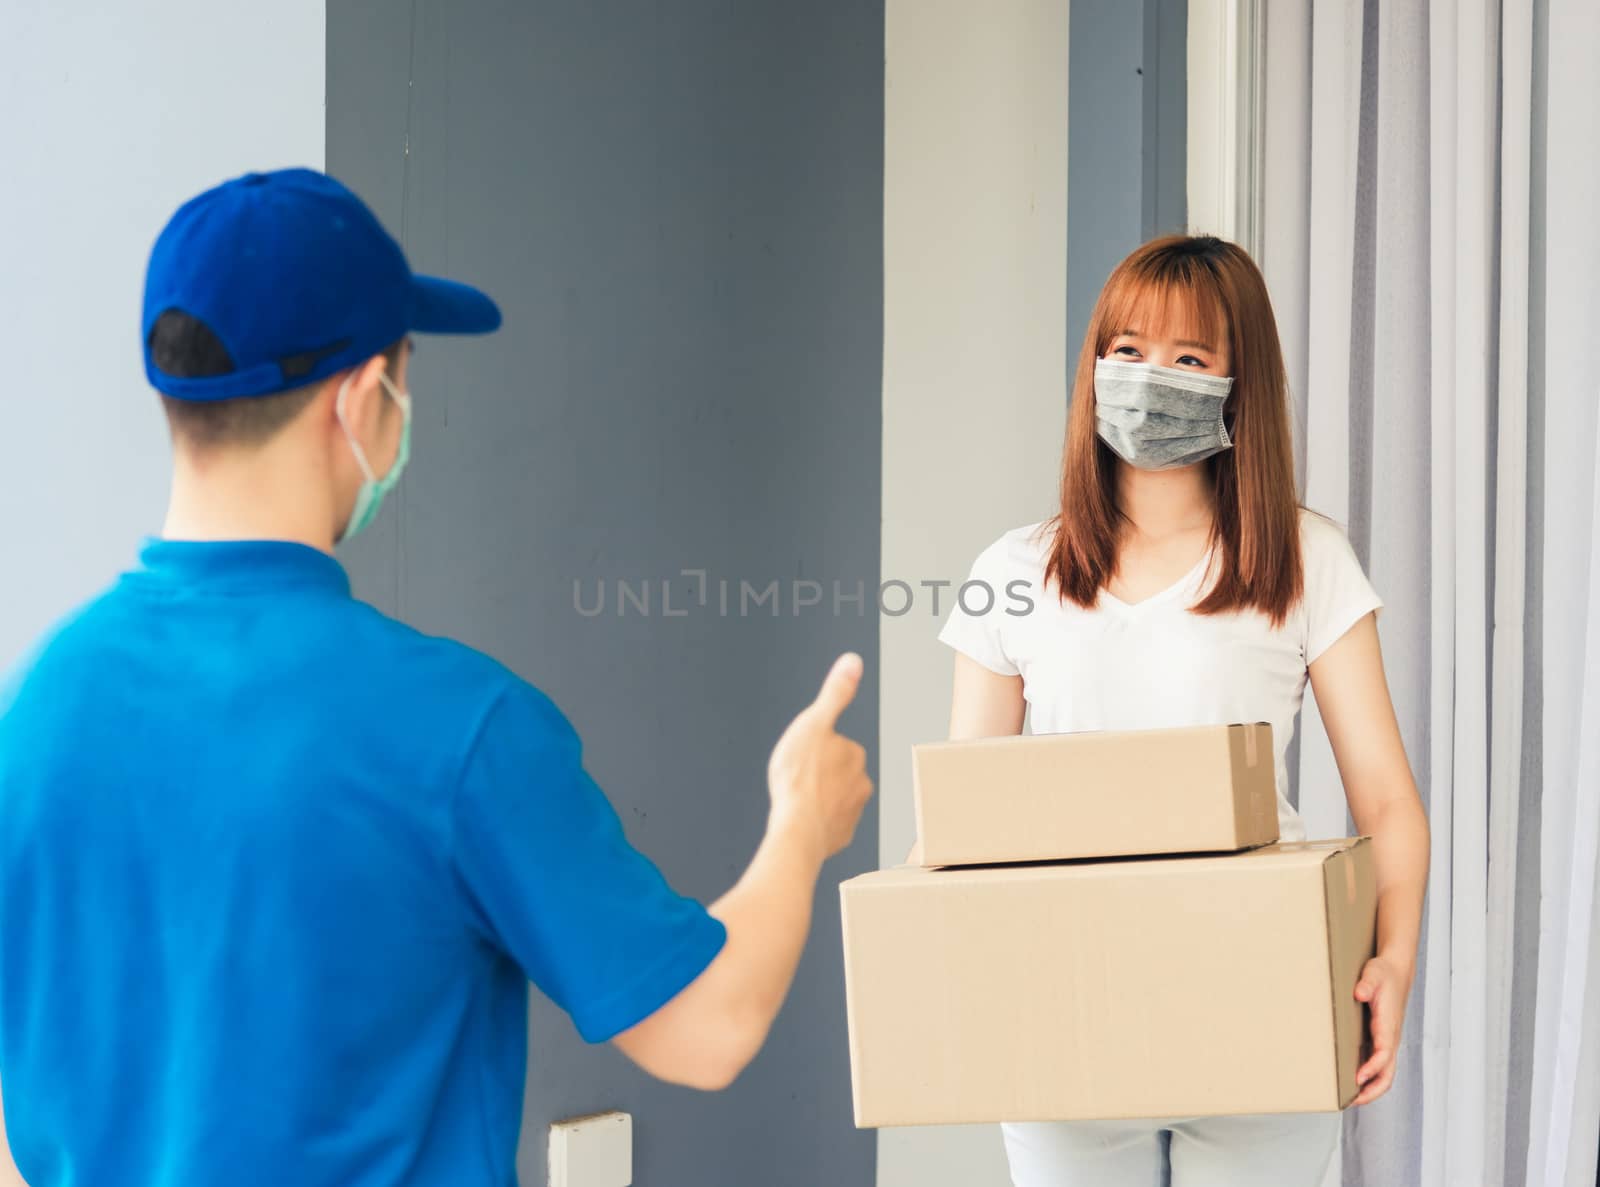 Asian delivery express courier young man giving parcel boxes to woman customer receiving both protective face mask and show thumbs up finger for good support sign, under curfew pandemic coronavirus